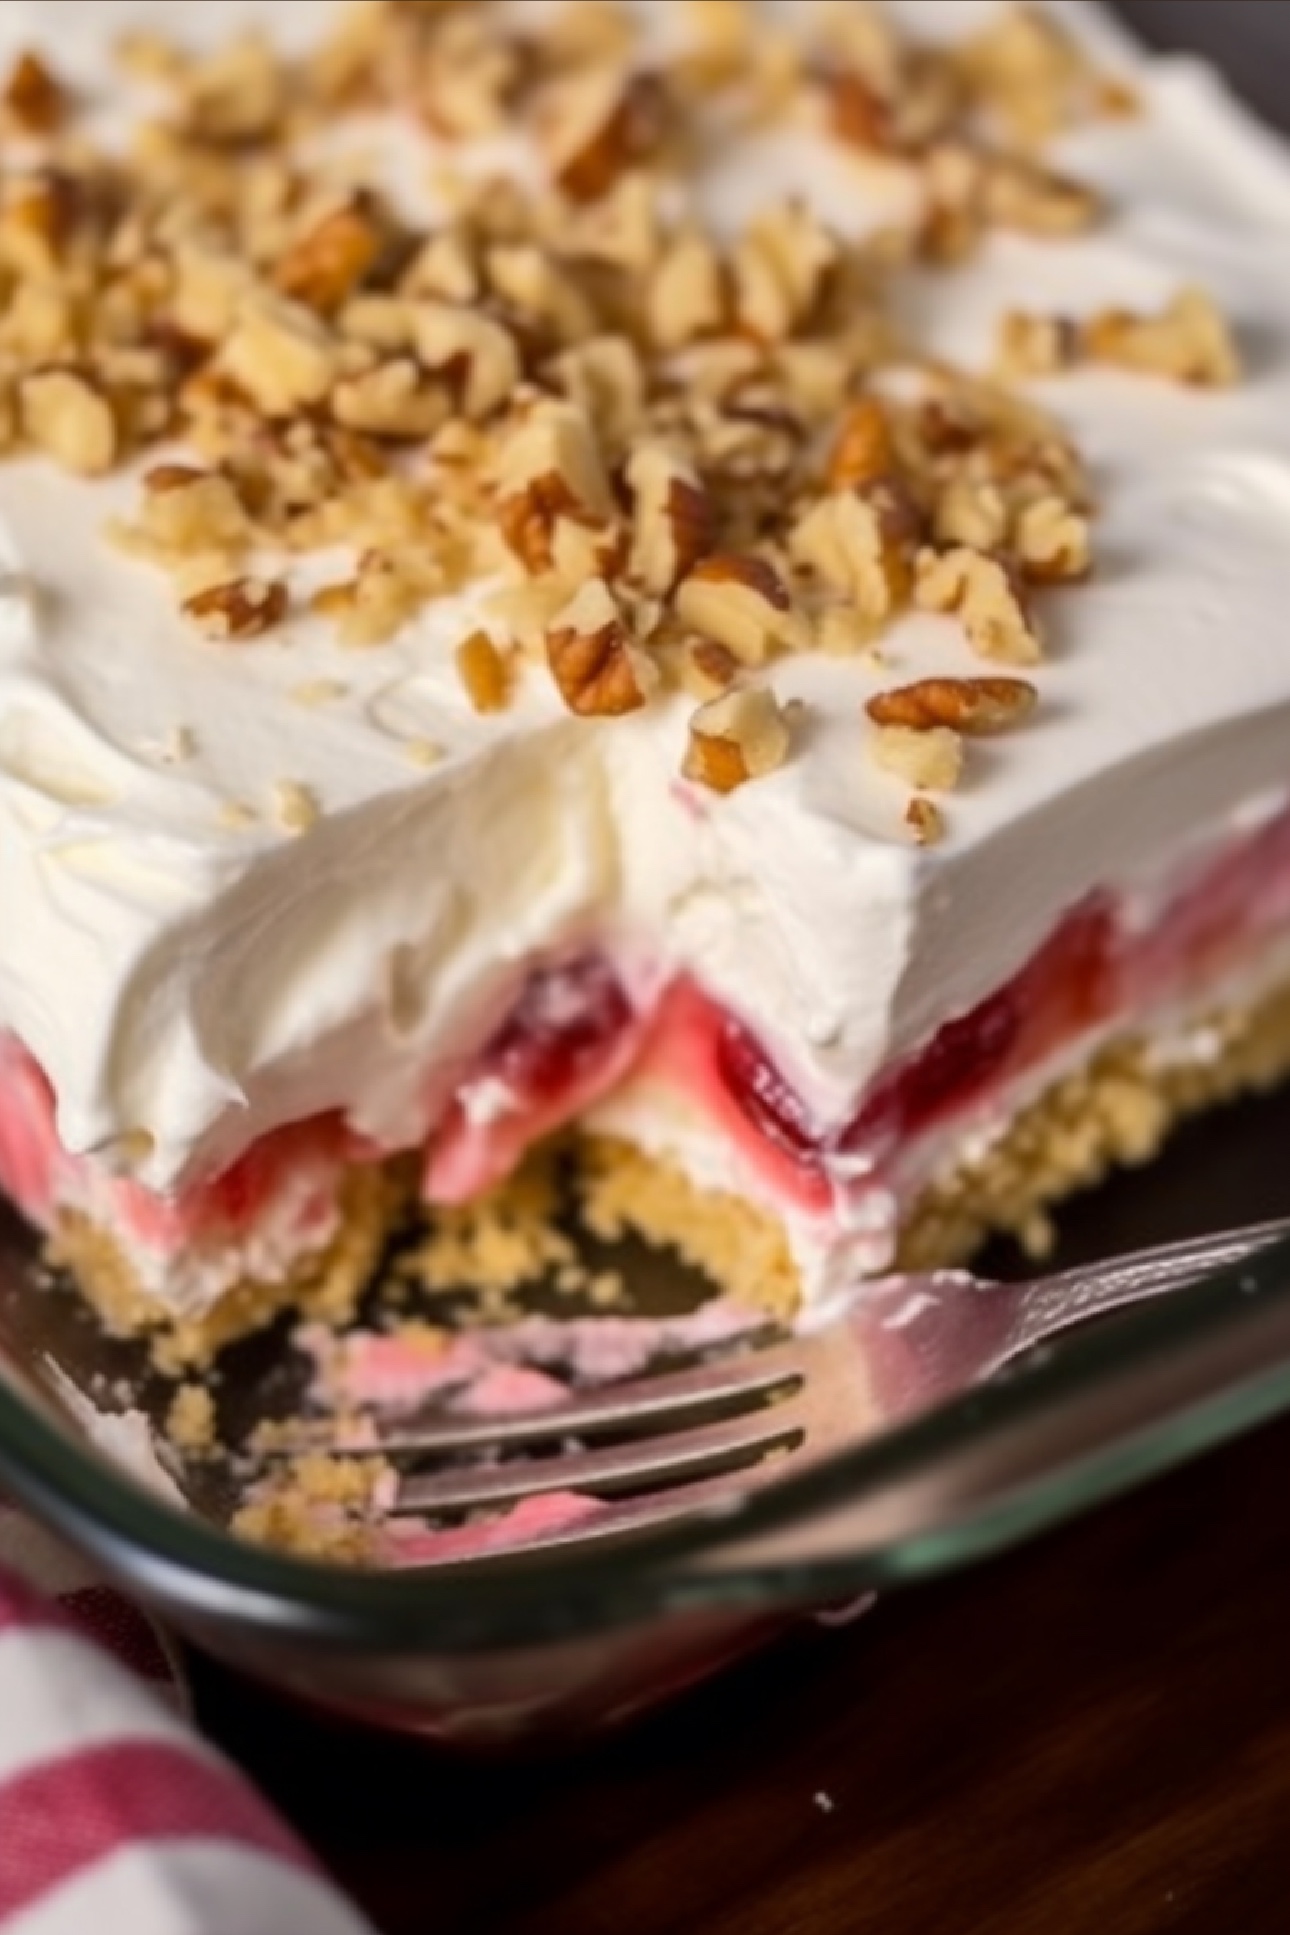 Love this Cherry Cheesecake Lush recipe? Pin it to your favorite dessert board on Pinterest